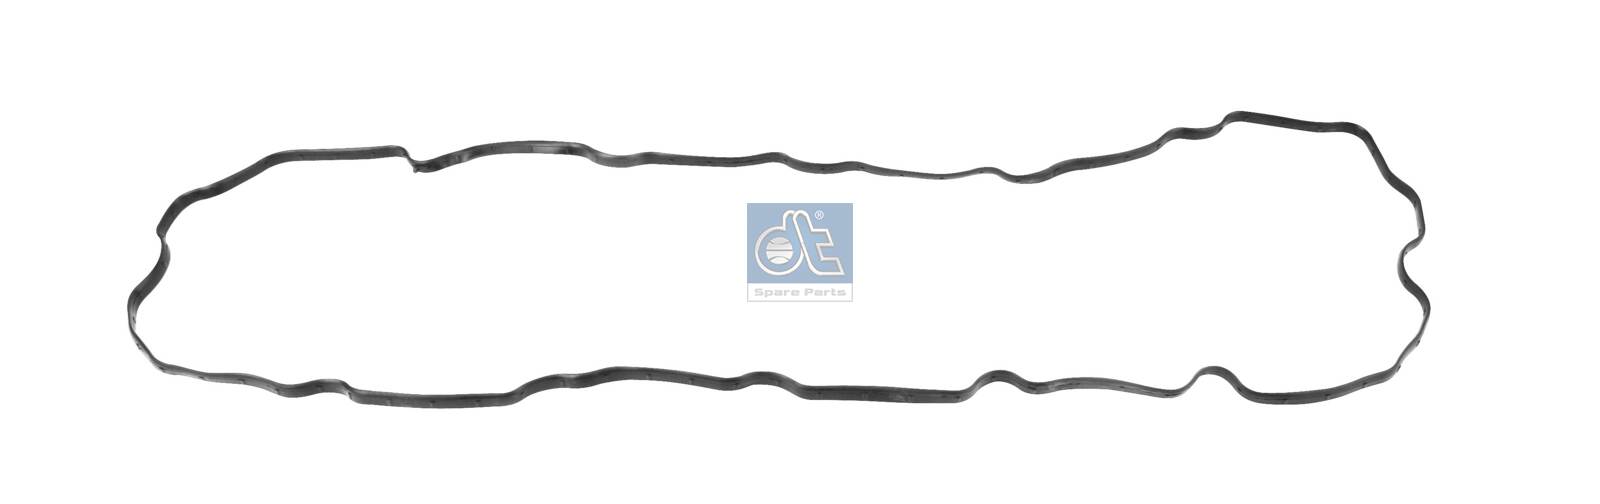 Gasket, cylinder head cover - 6.22122 DT Spare Parts - 5010295777, 078.023, 16-349000010